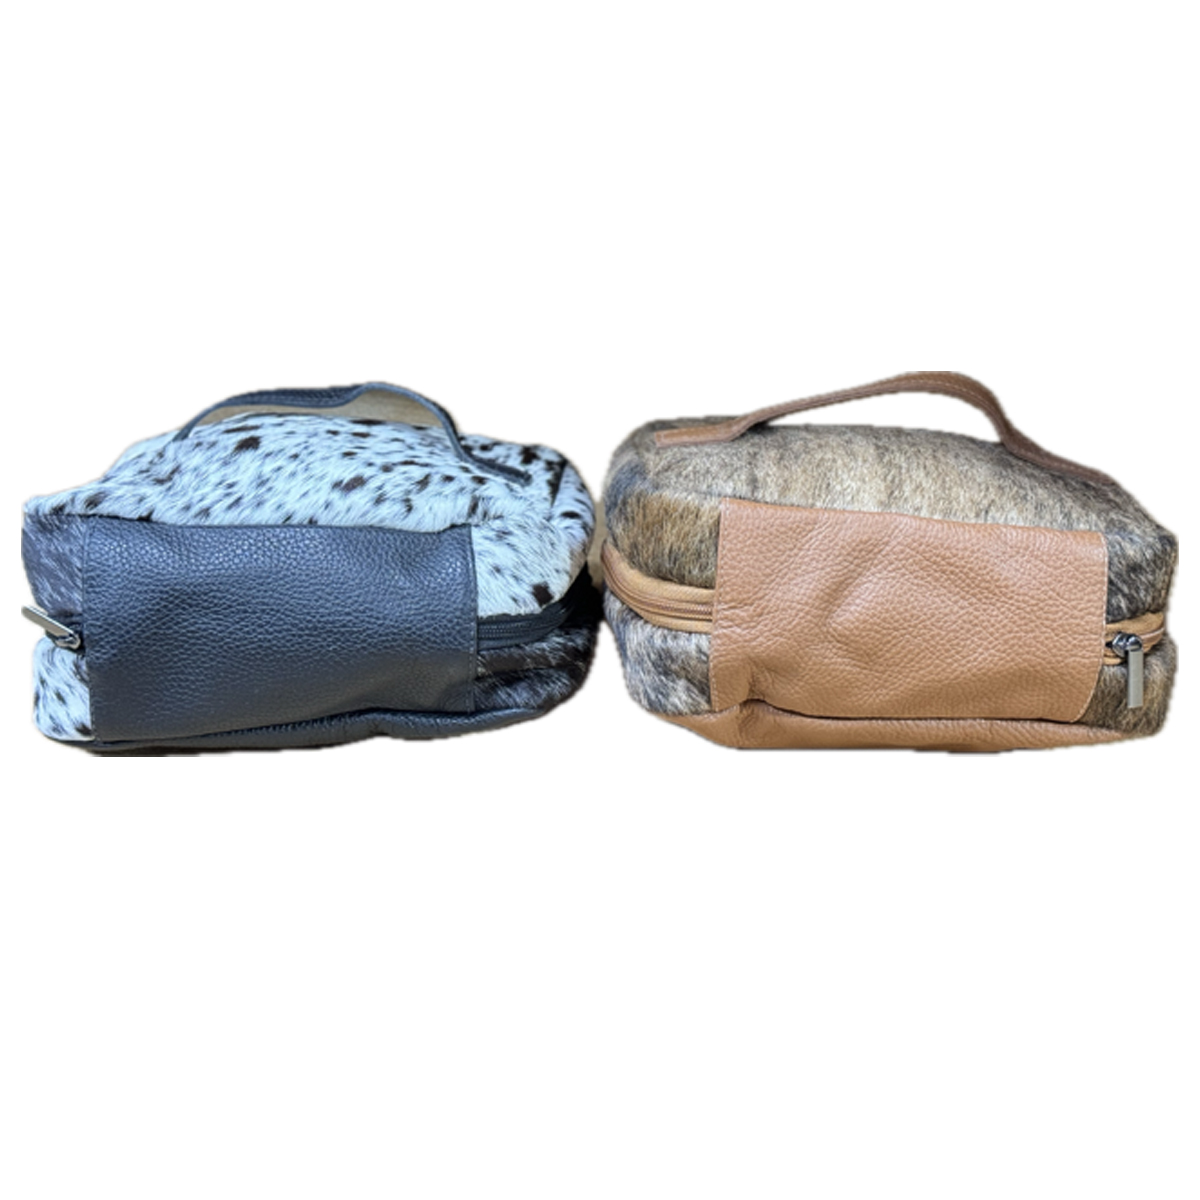 Cowhide & Leather Toiletry Bag (Closeout)